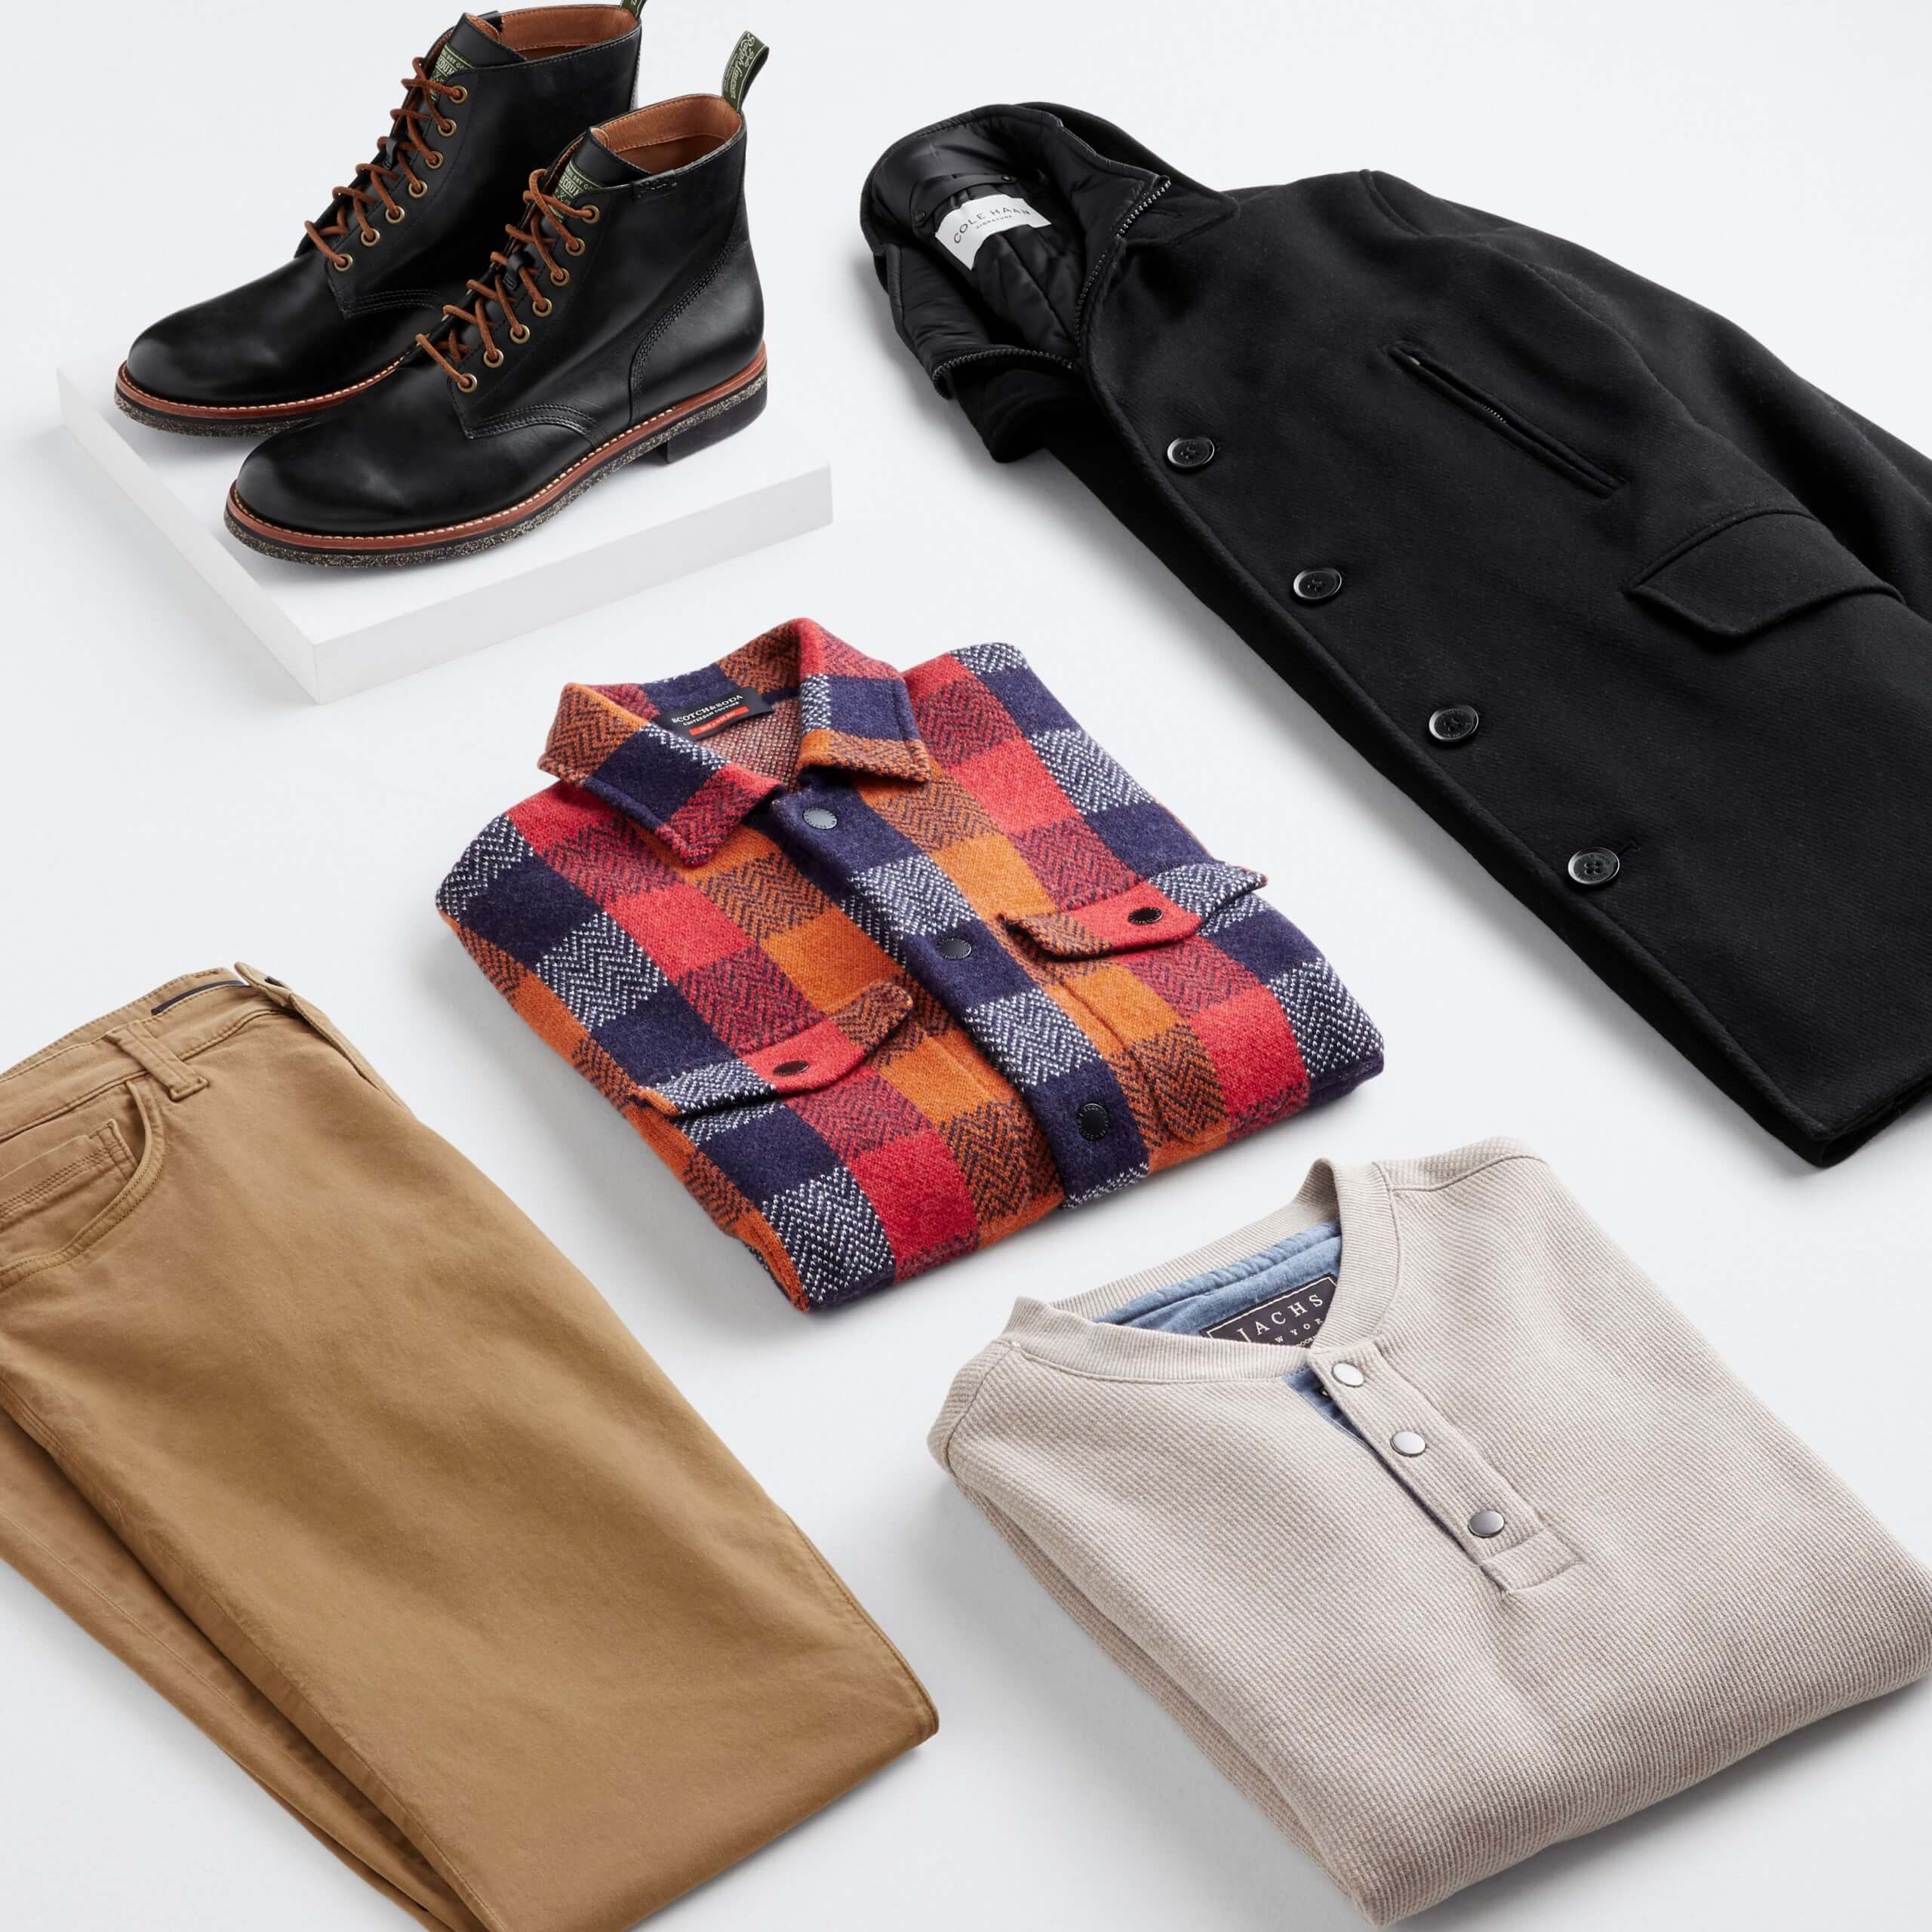 Best Men's Fall Outfit Ideas 2021 - Men's Fall Fashion Style Essentials